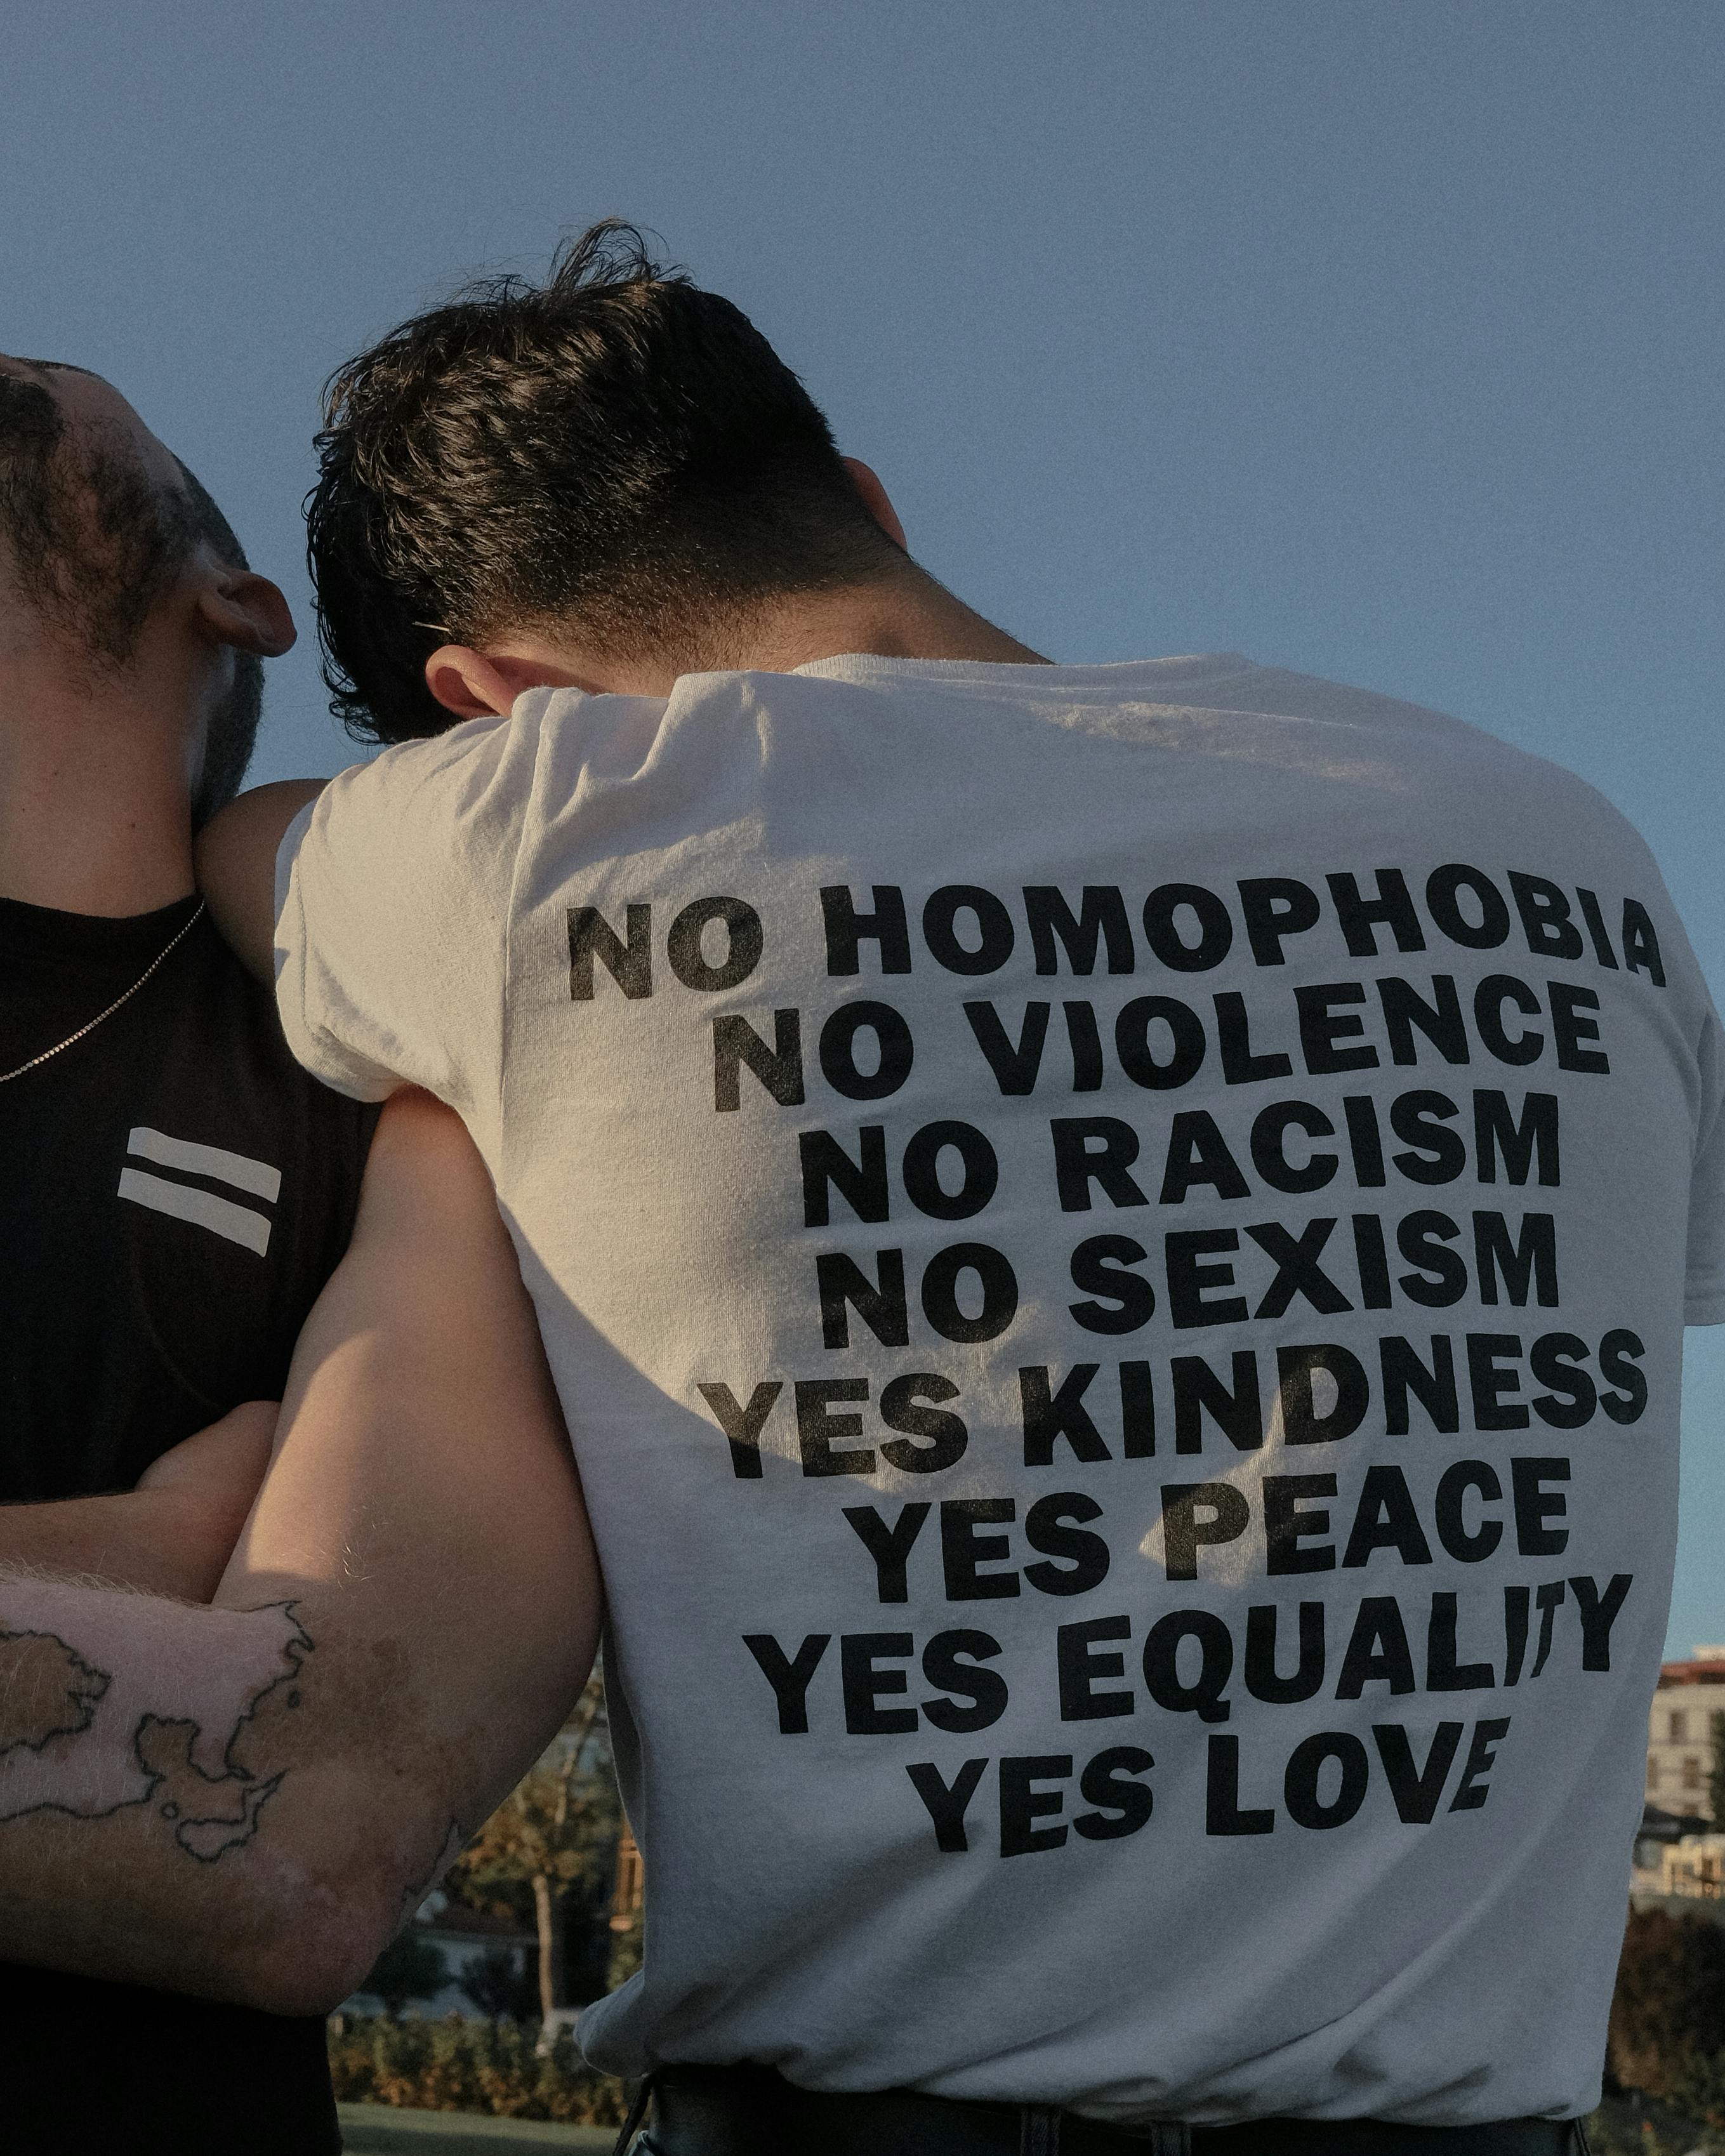 man wearing tshirt with equality slogans